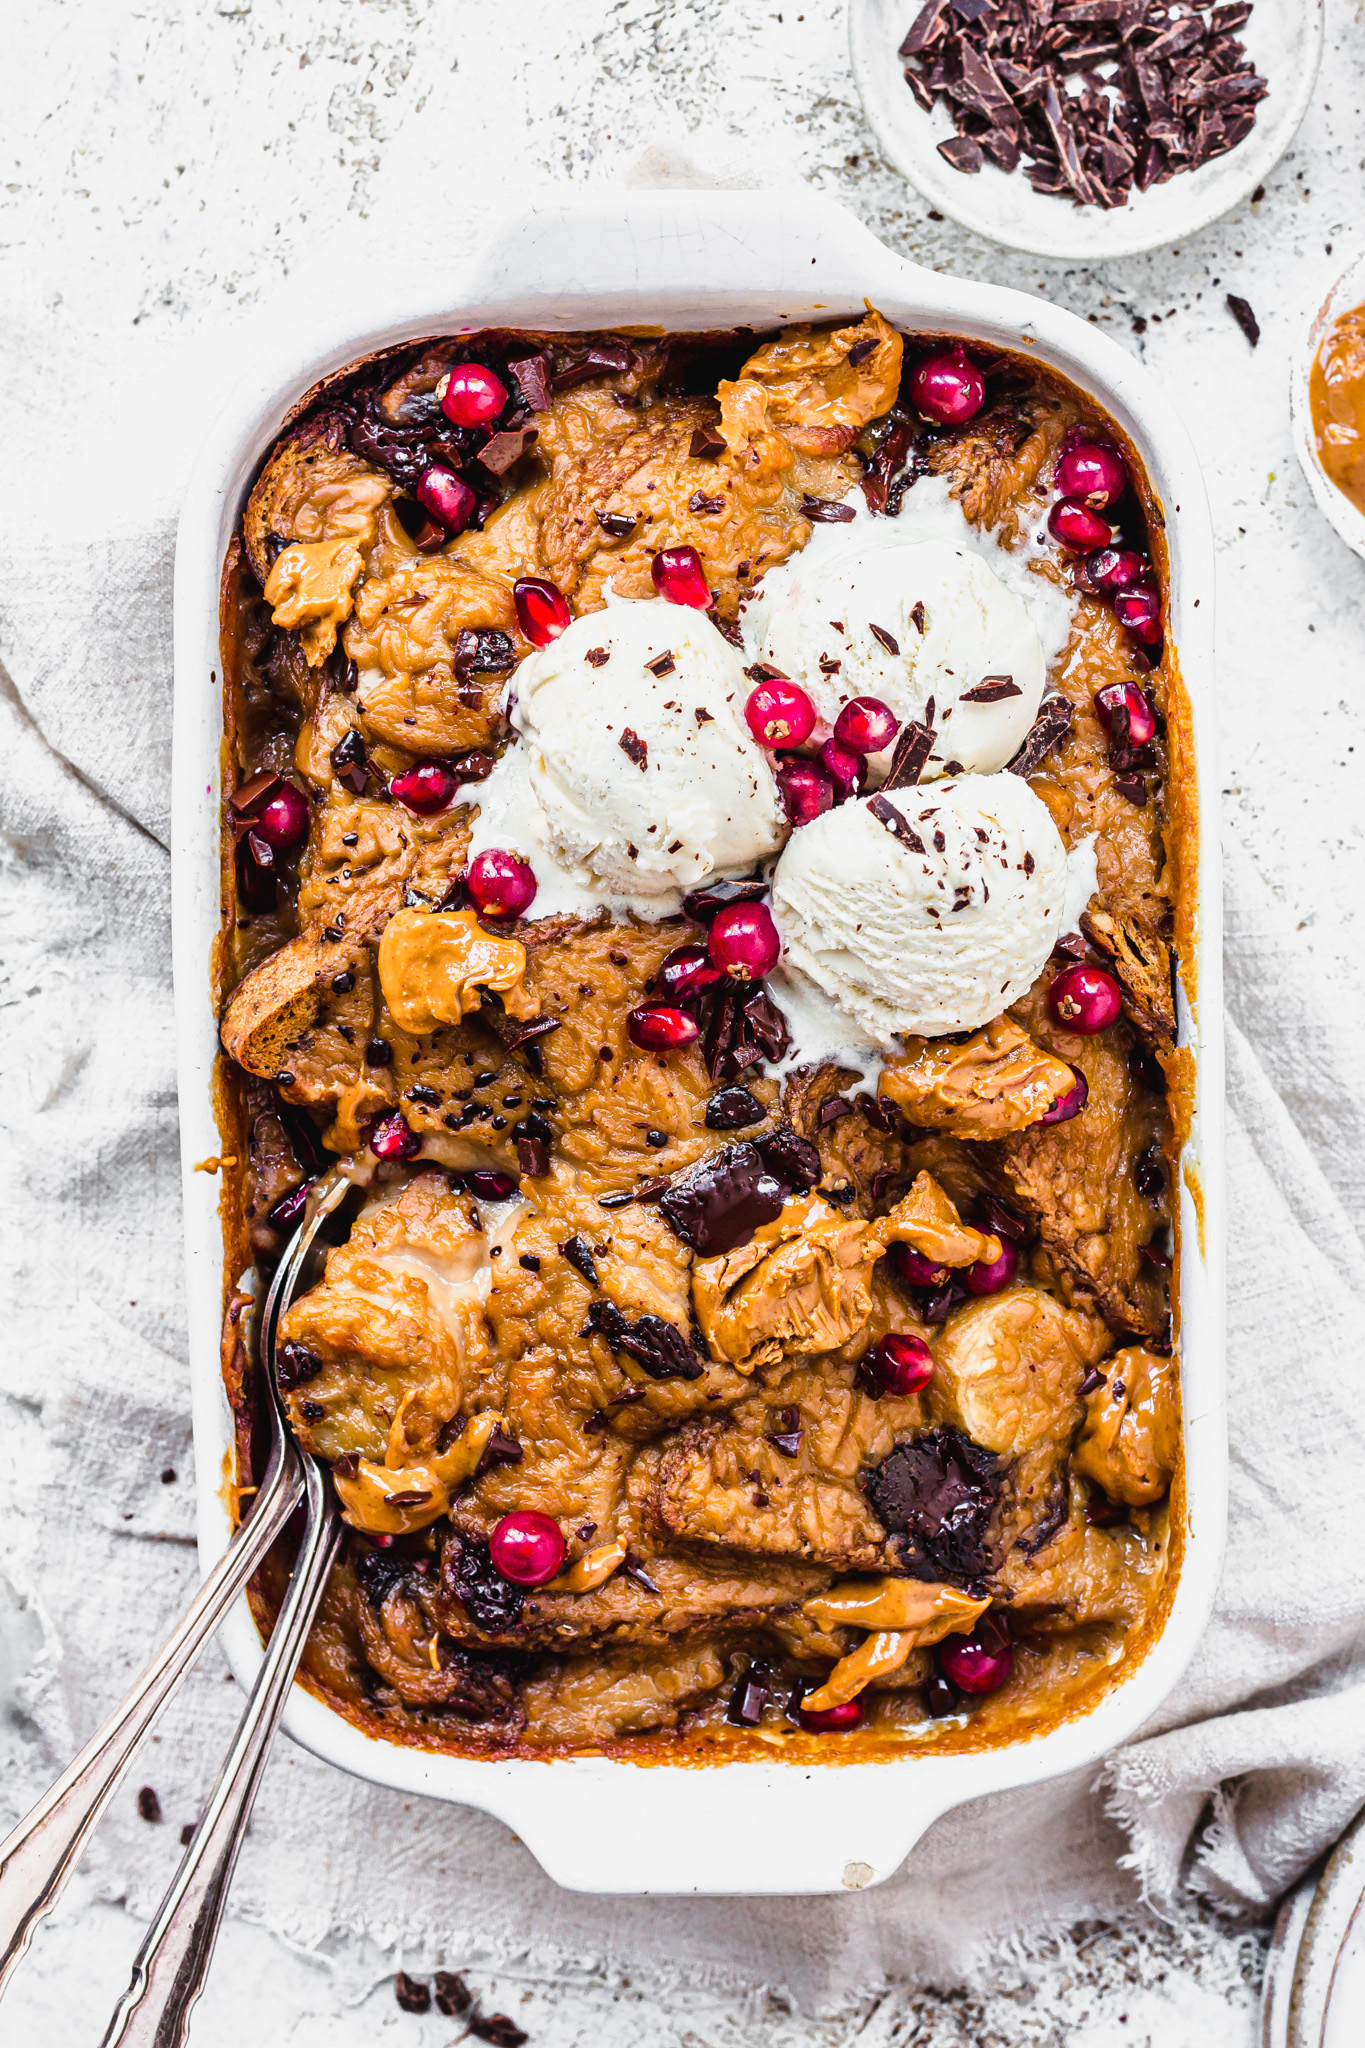 Peanut Butter Banana and Chocolate Bread and Butter Pudding